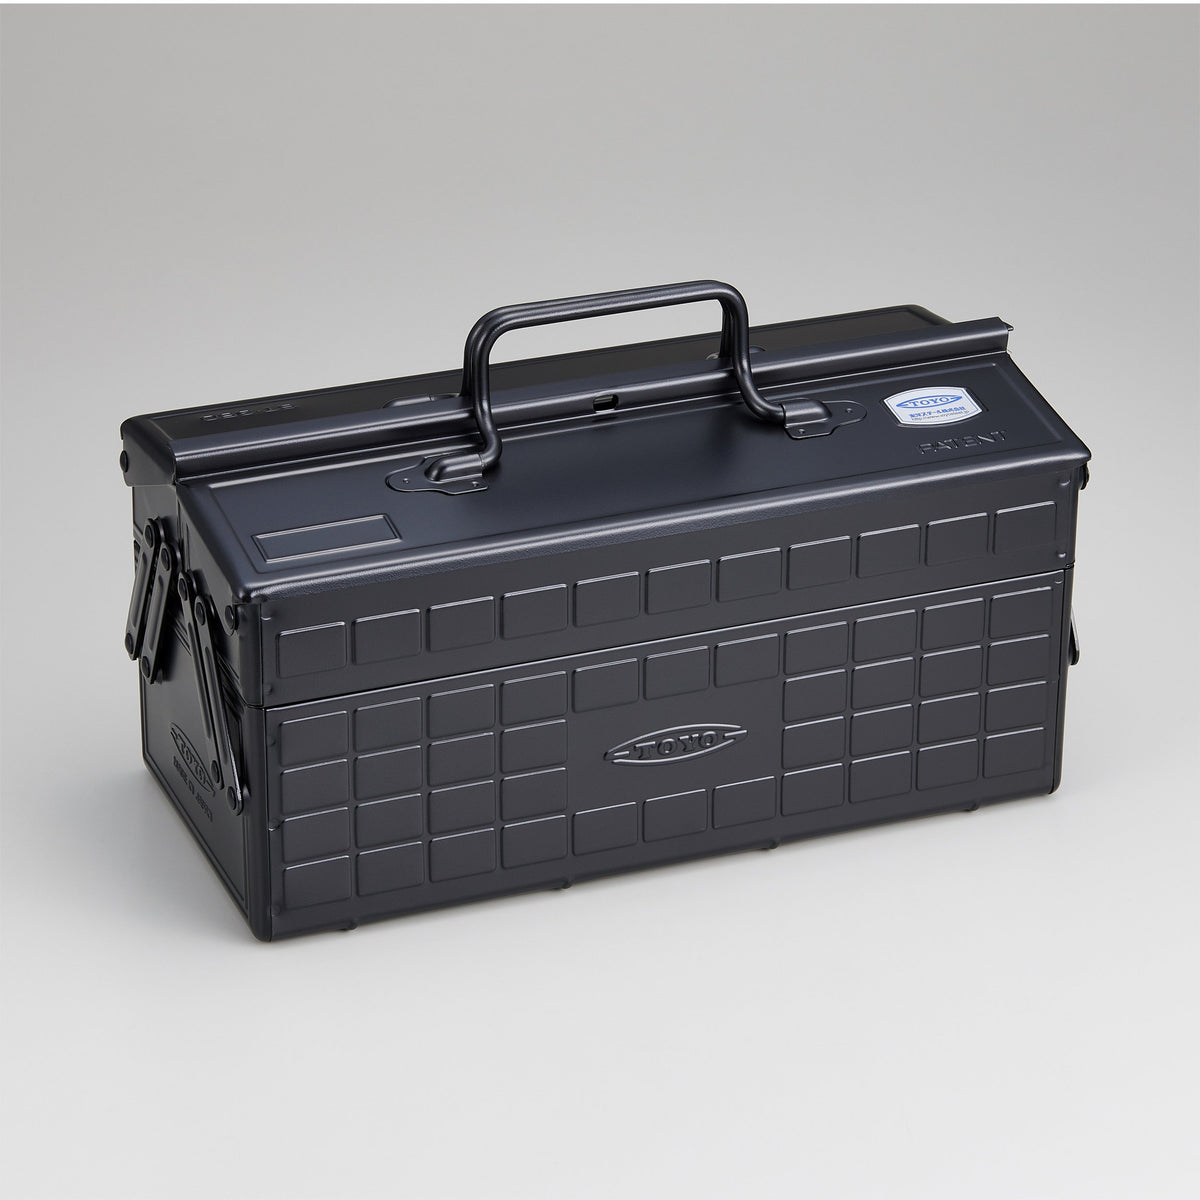 AMEICO - Official US Distributor of Toyo - Steel Toolbox T-410